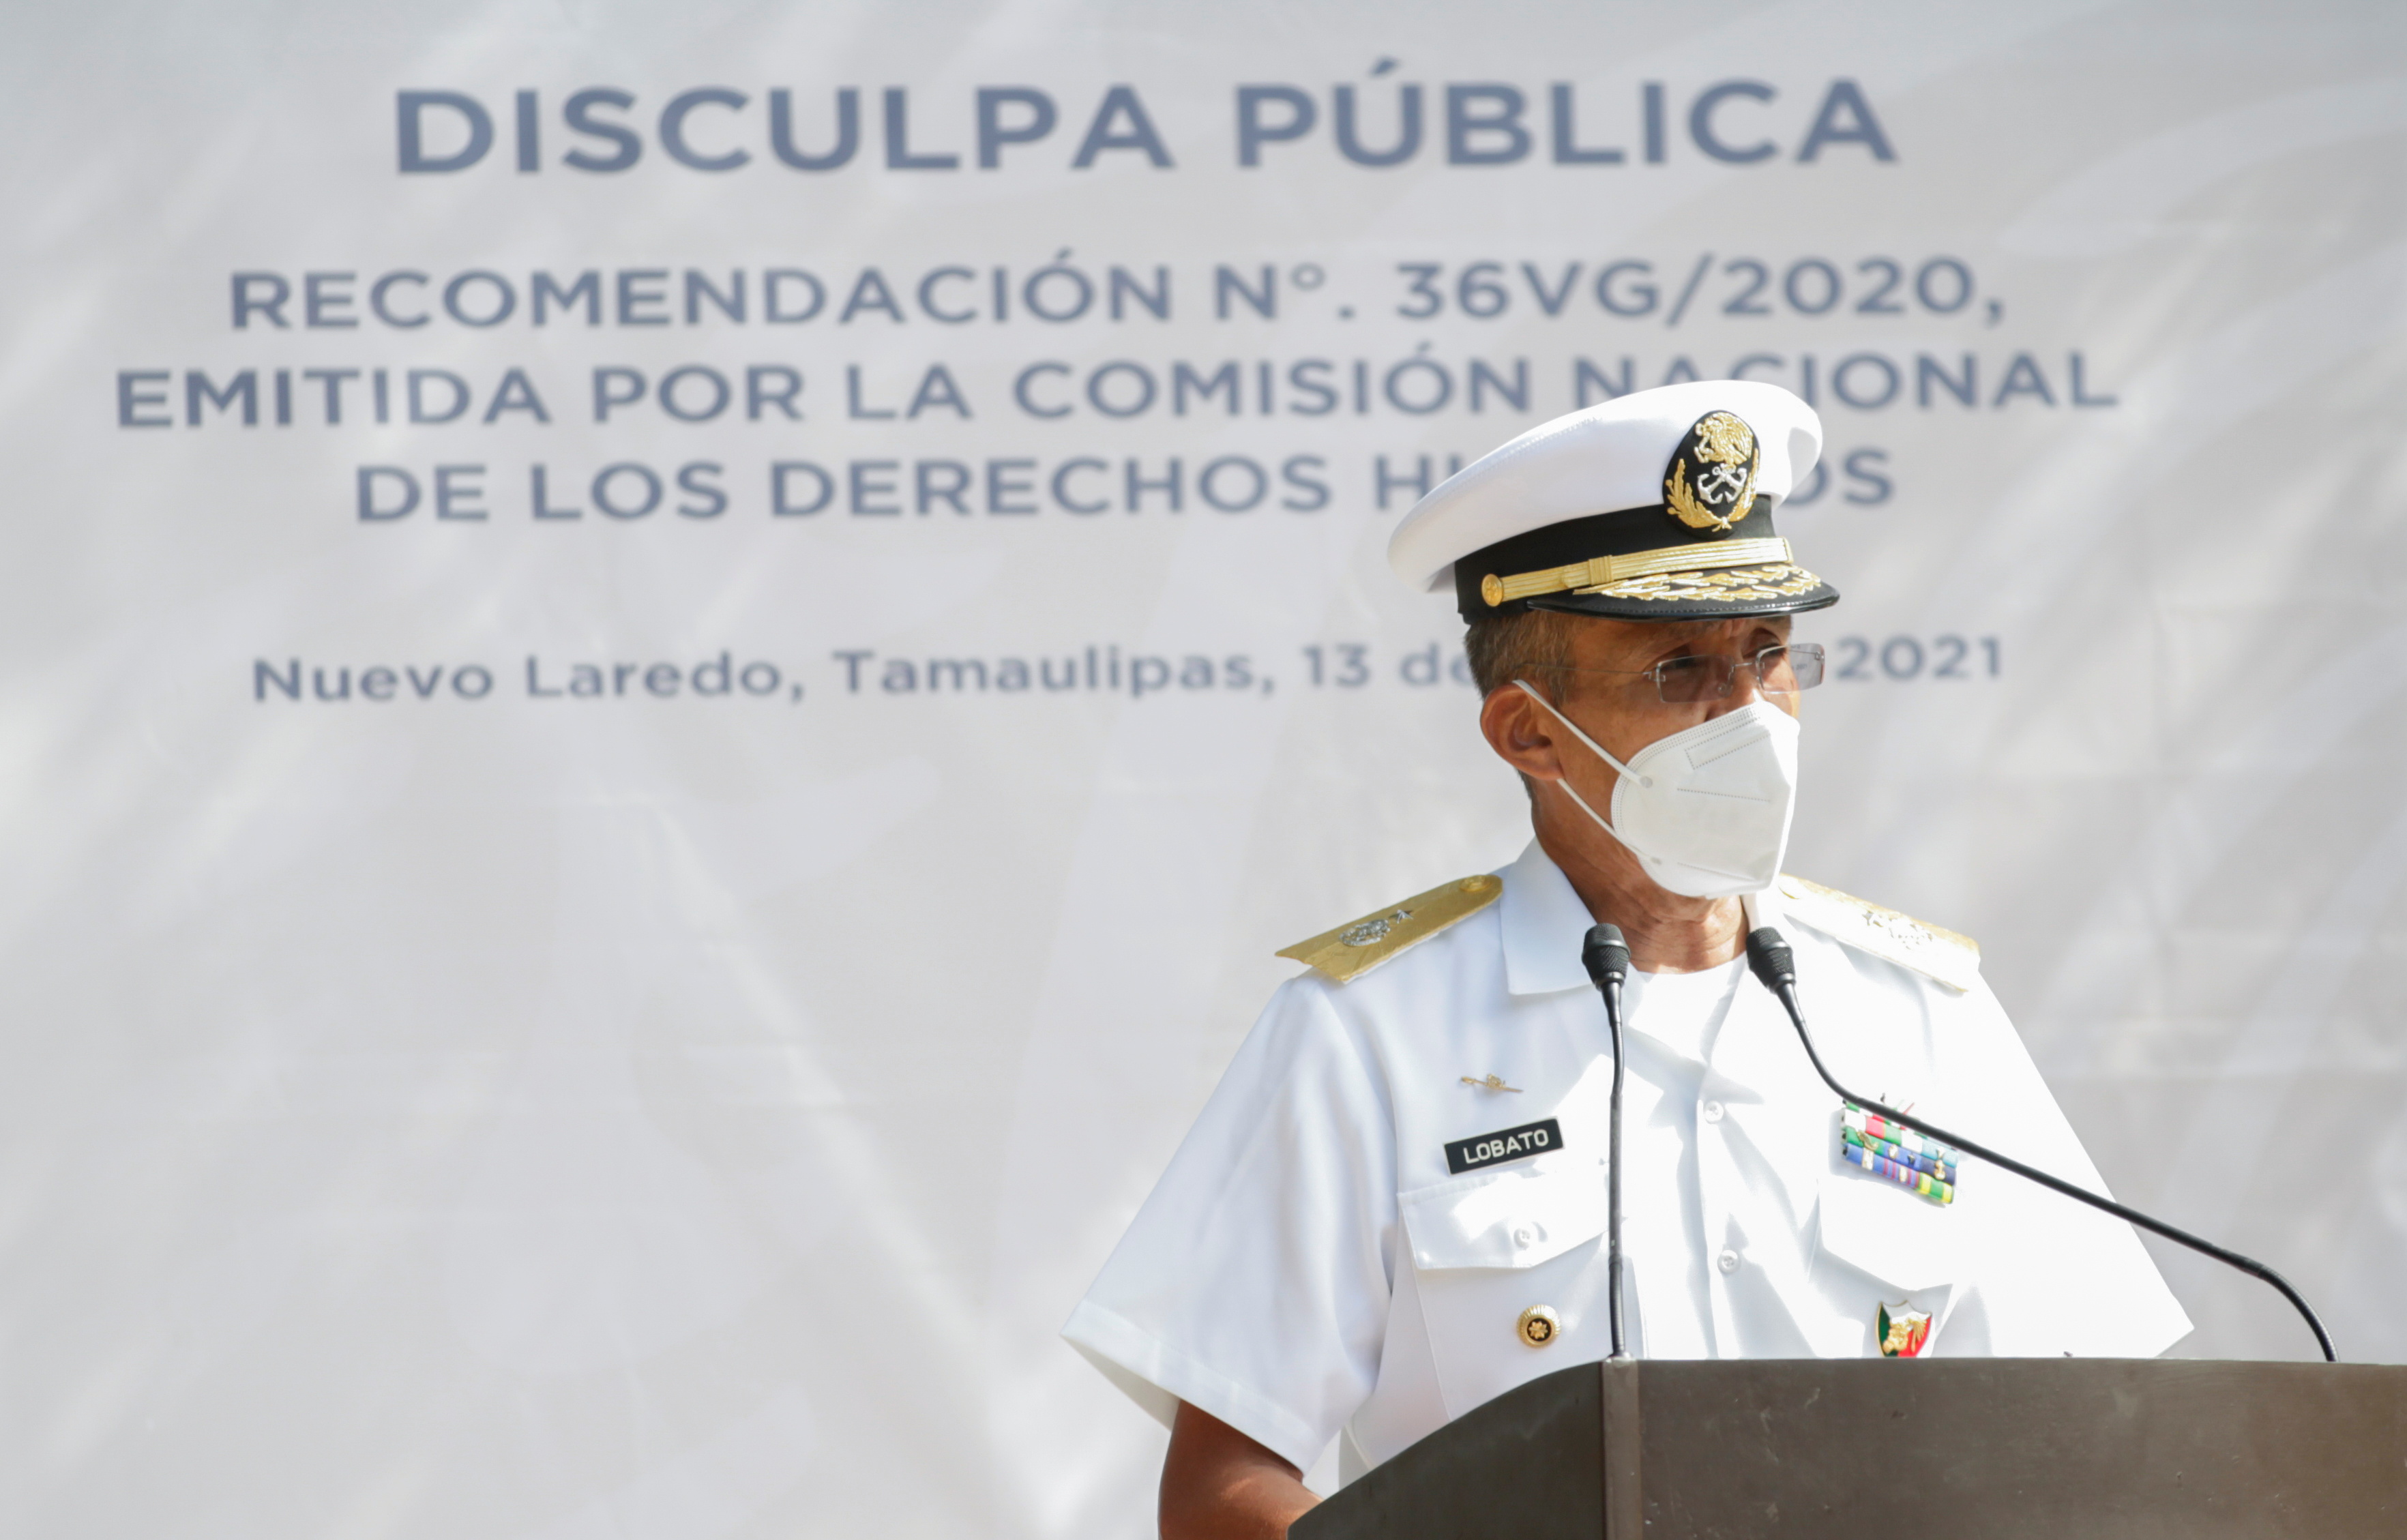 Rear Admiral Ramiro Lobato Camacho speaks as members of the Mexican Marines offer an apology to family members of victims for their role in the 2018 forced disappearances, according to Attorney General's Office in Nuevo Laredo, Mexico July 13, 2021. REUTERS/Daniel Becerril